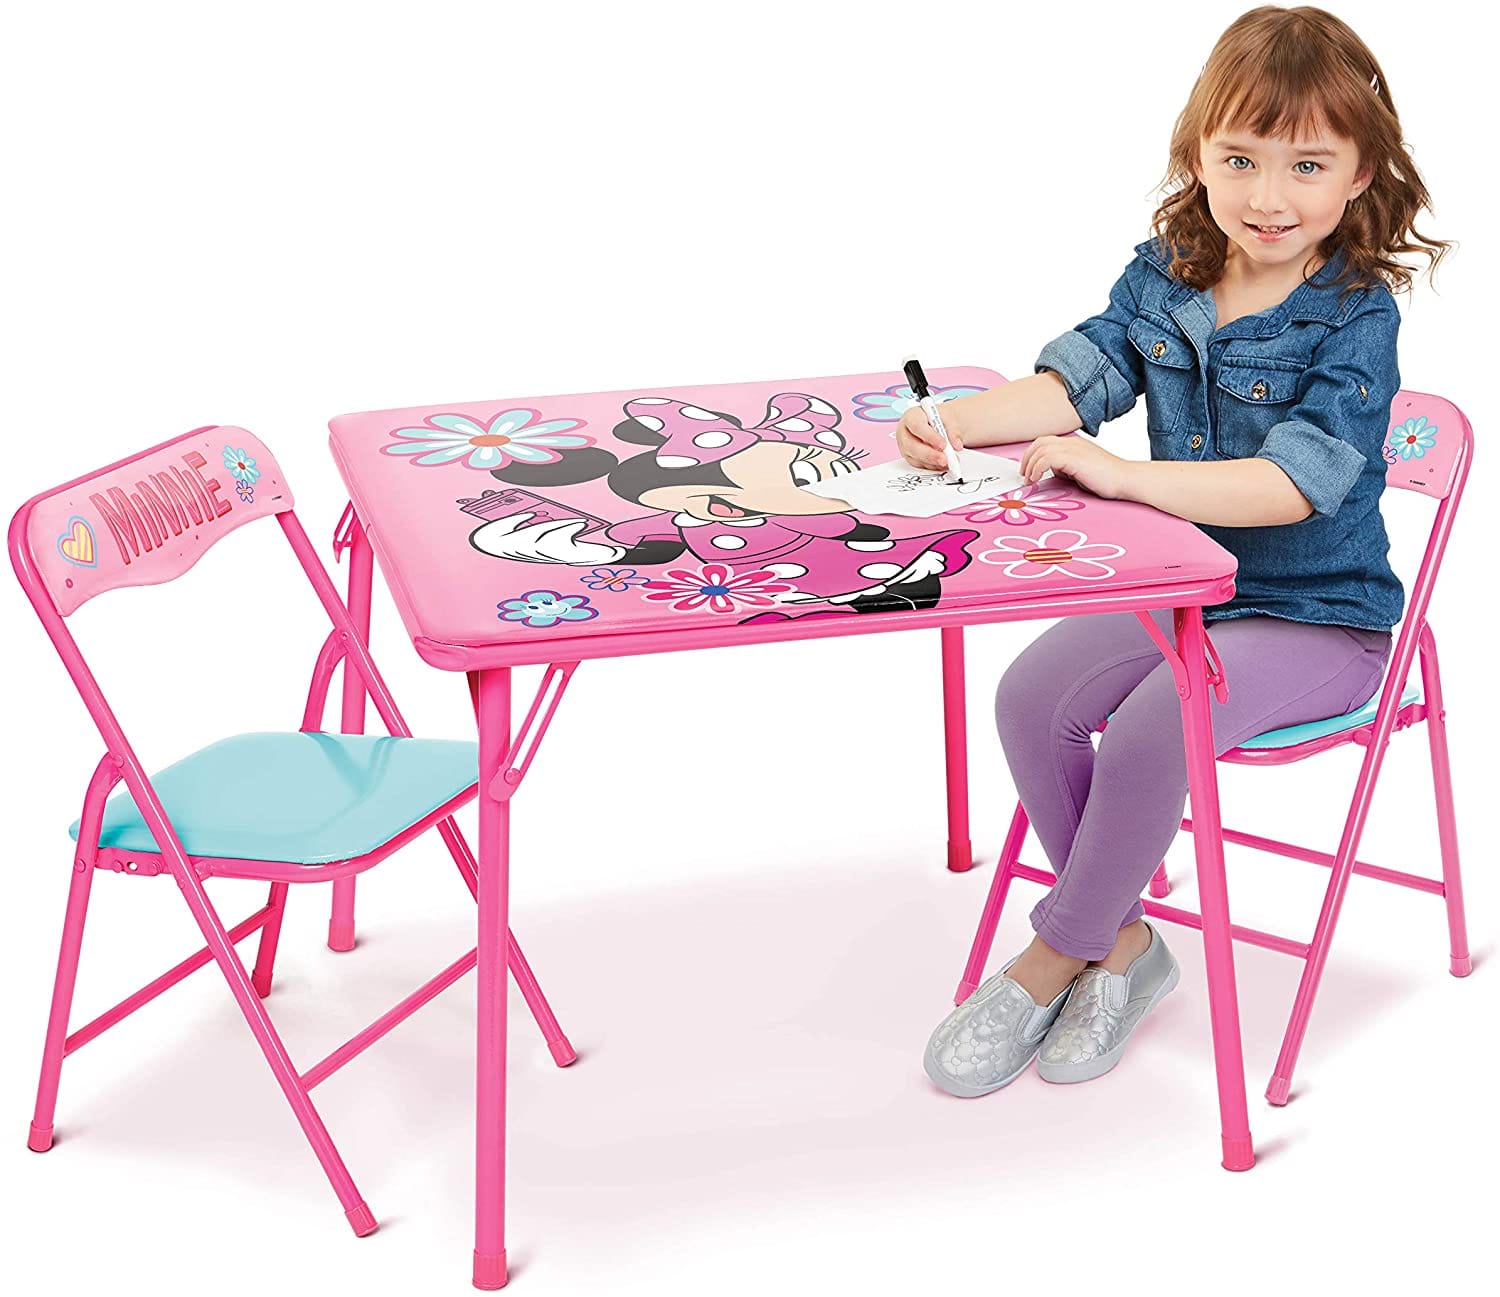 GTBW  Folding Minnie Mouse Table & Chair: Perfect for playrooms, classrooms, day cares, Sunday schools and kids rooms - 601691